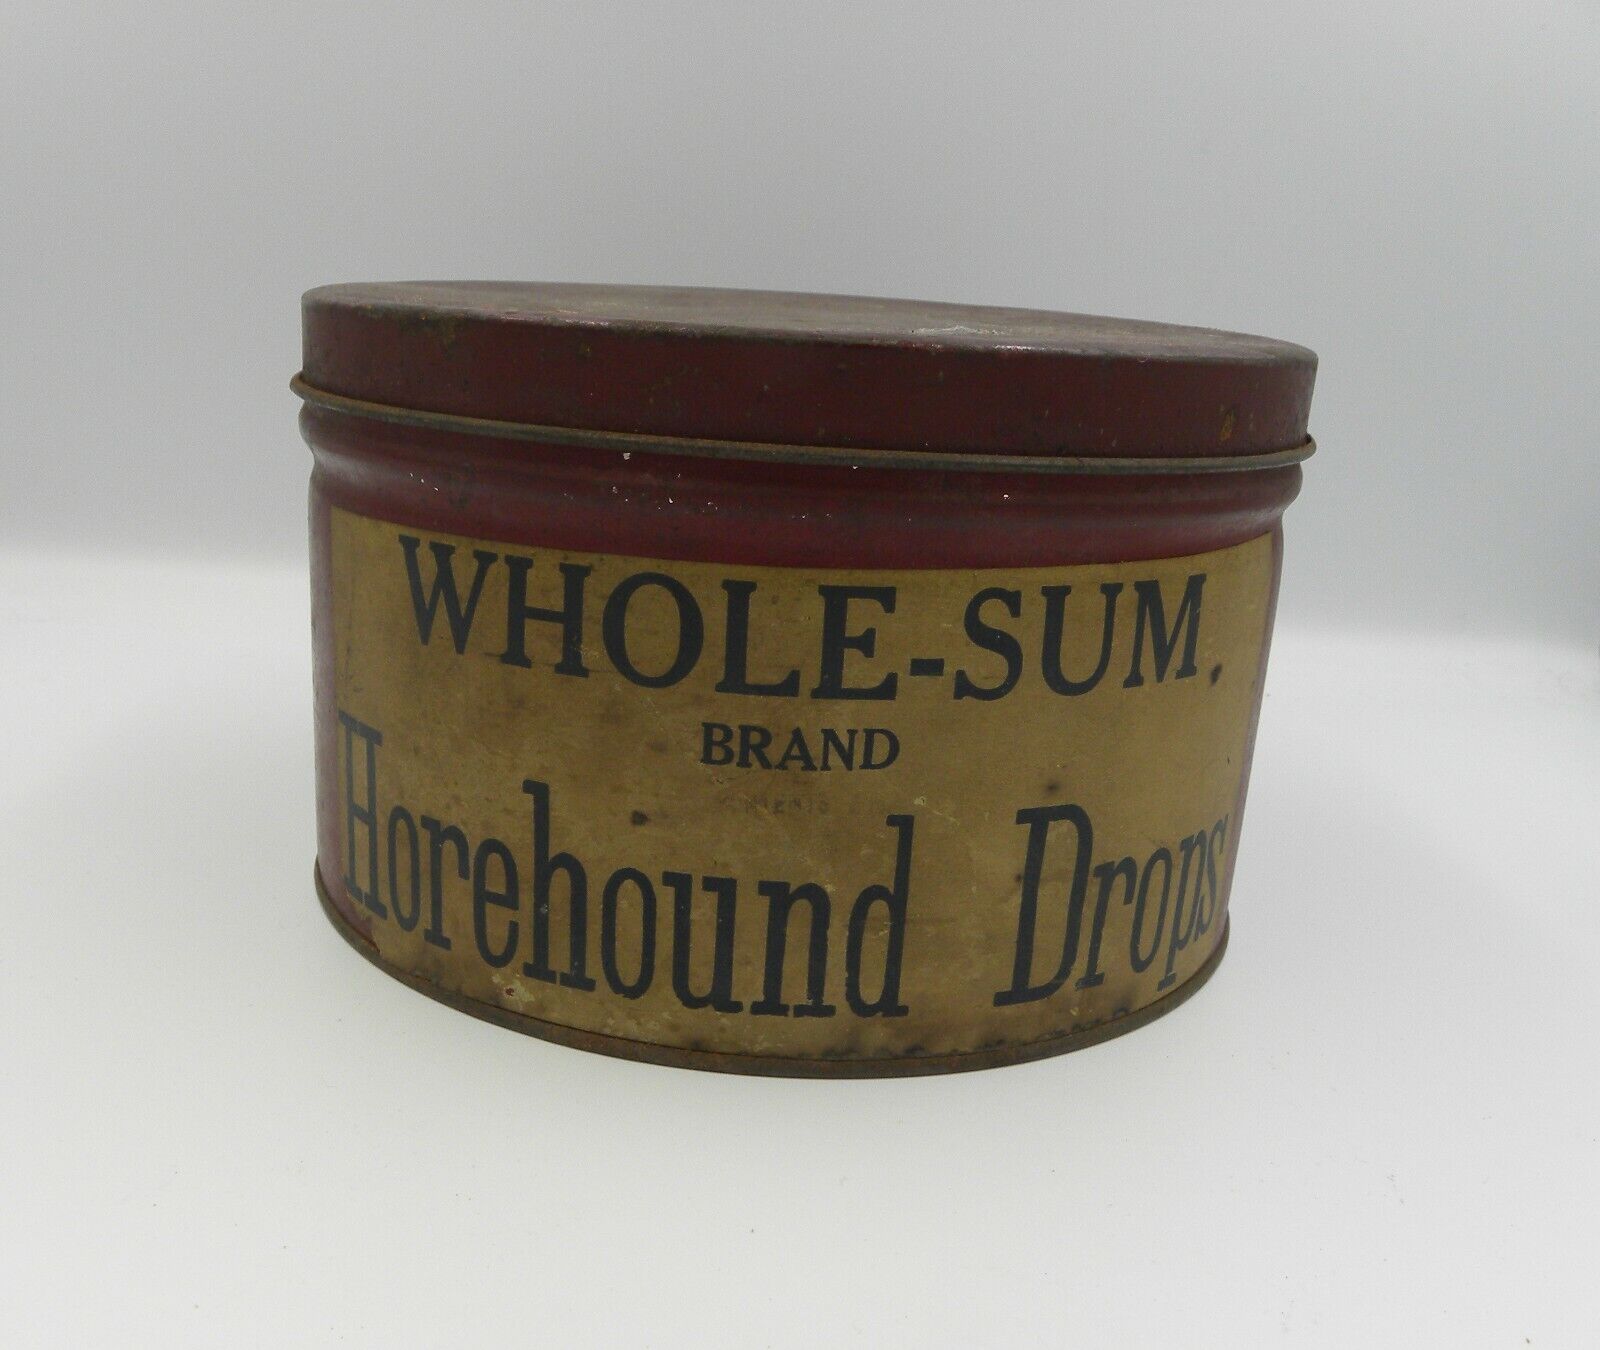 Vintage WHOLE-SUM BRAND Horehound Candy Drops Advertising Tin with Paper Label